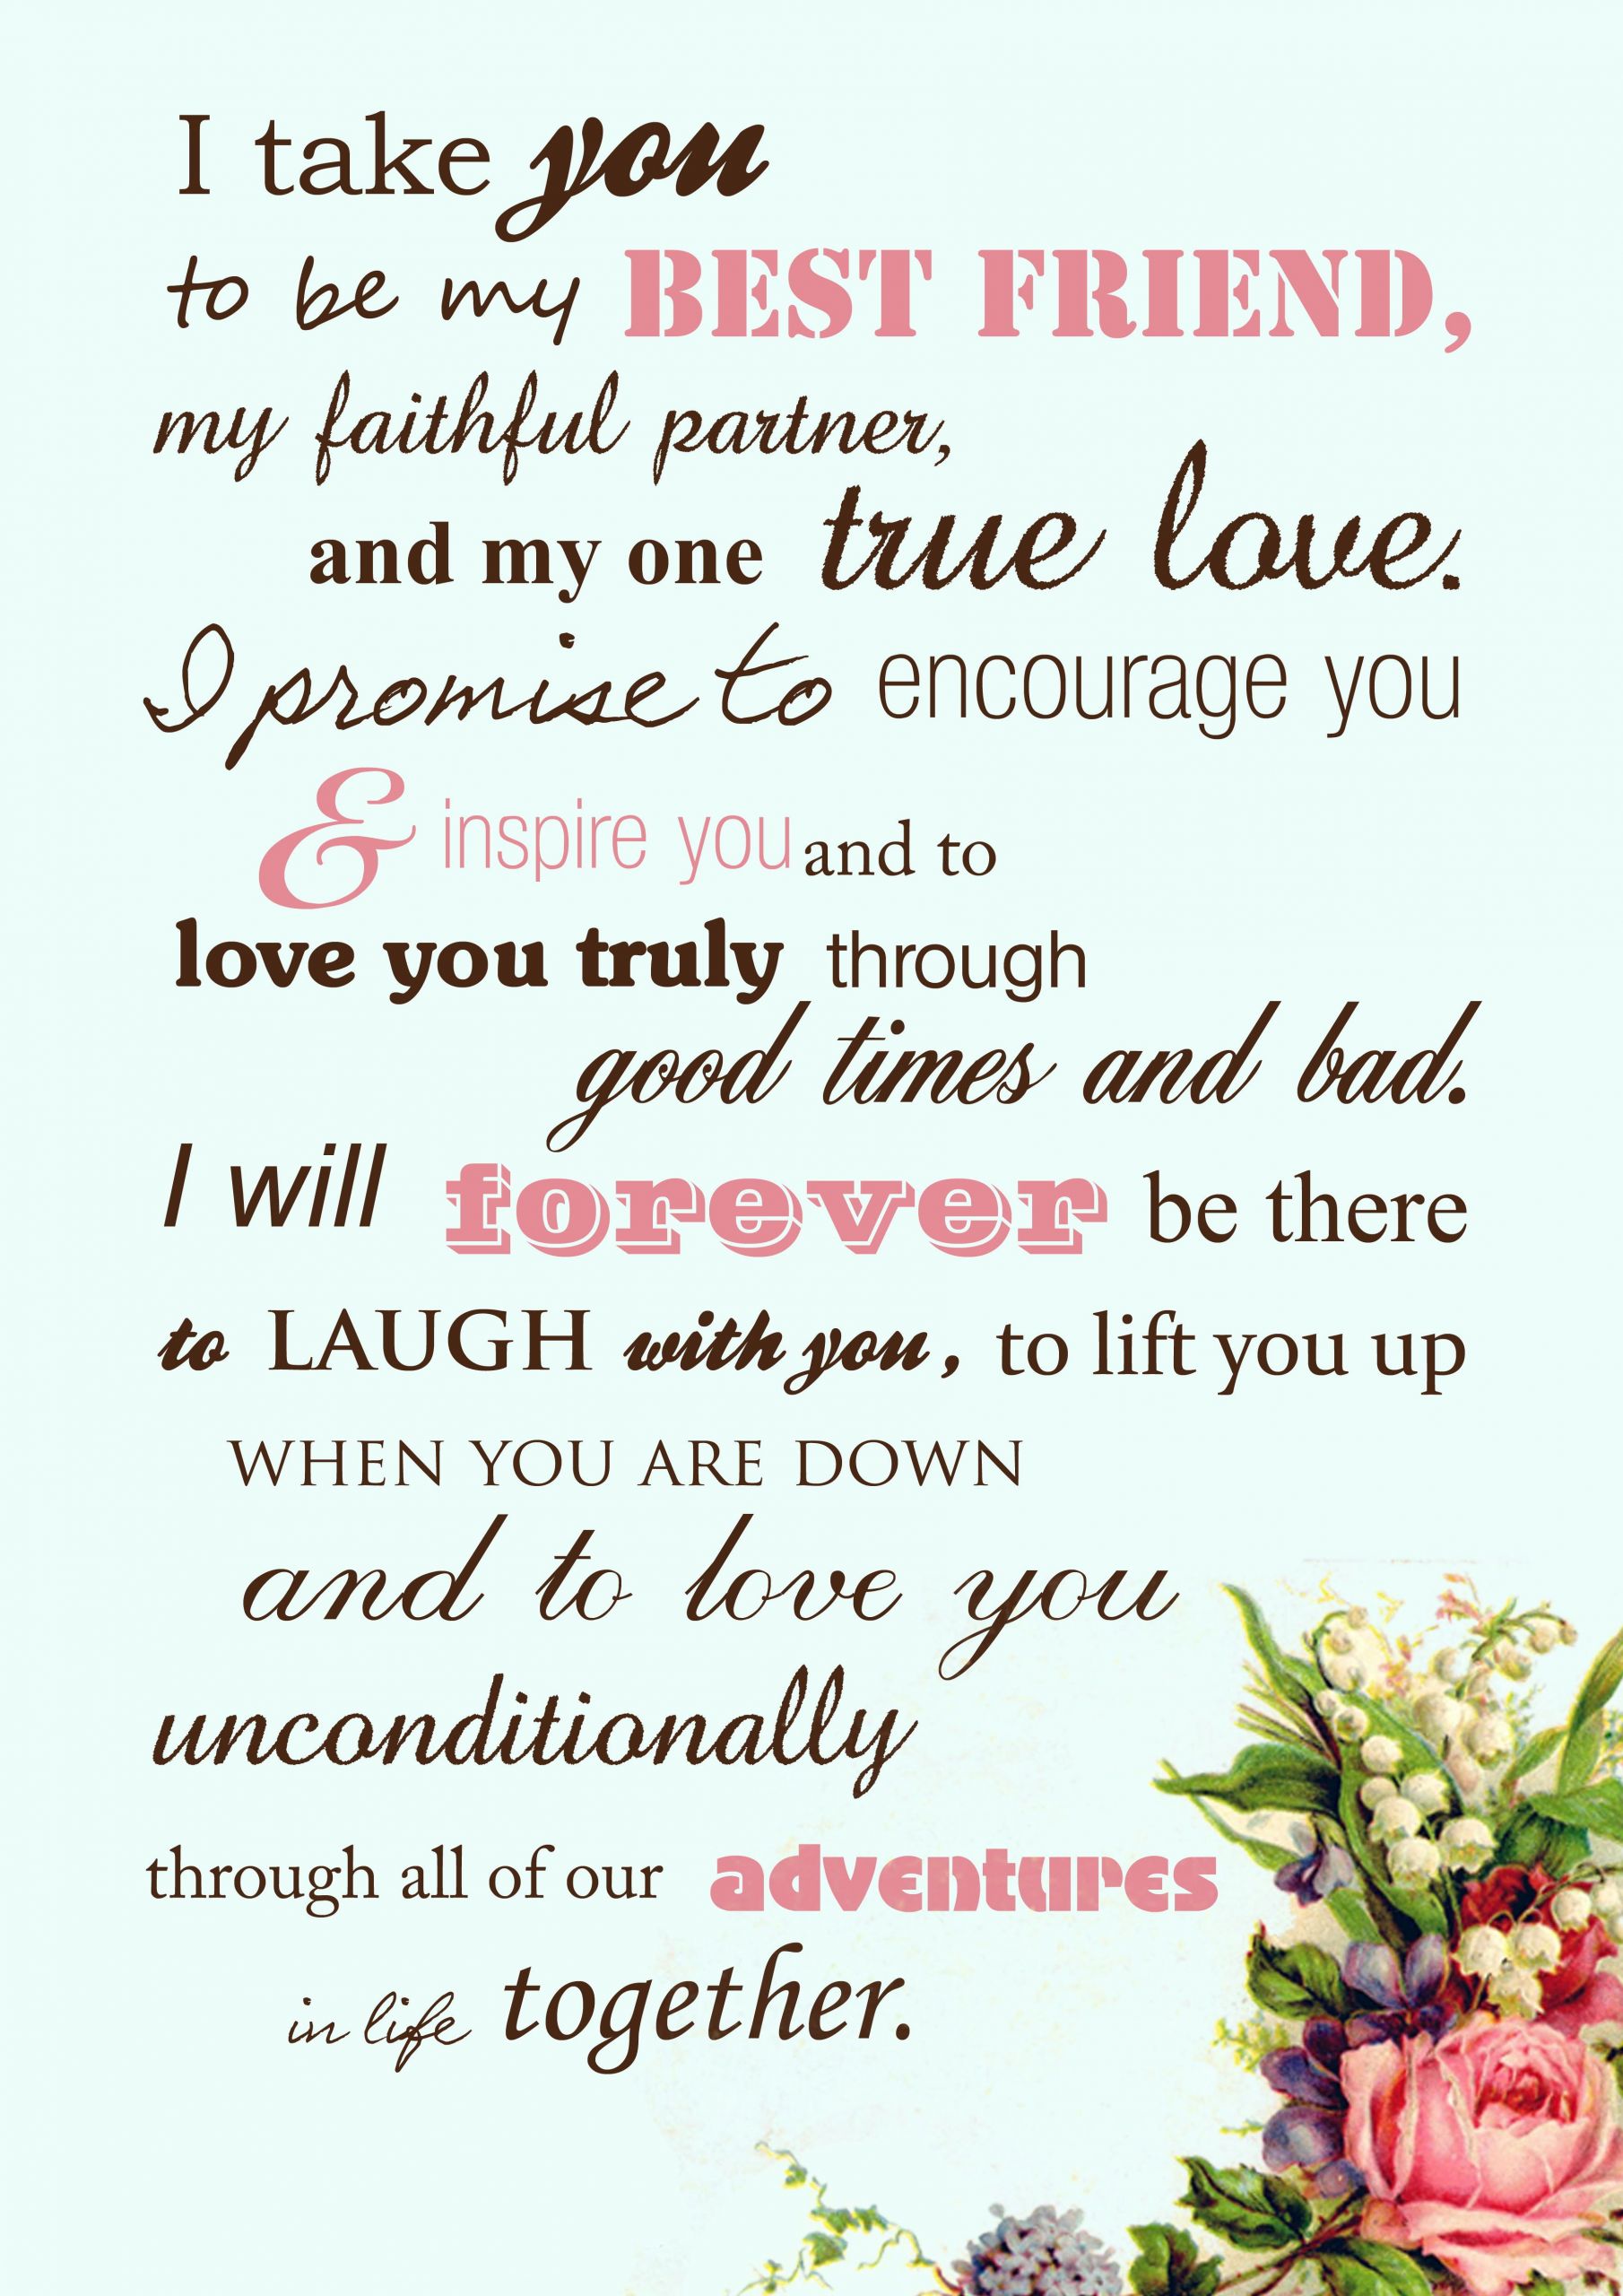 Modern Wedding Vows Examples
 Beautiful wedding vows instead of the traditional by the